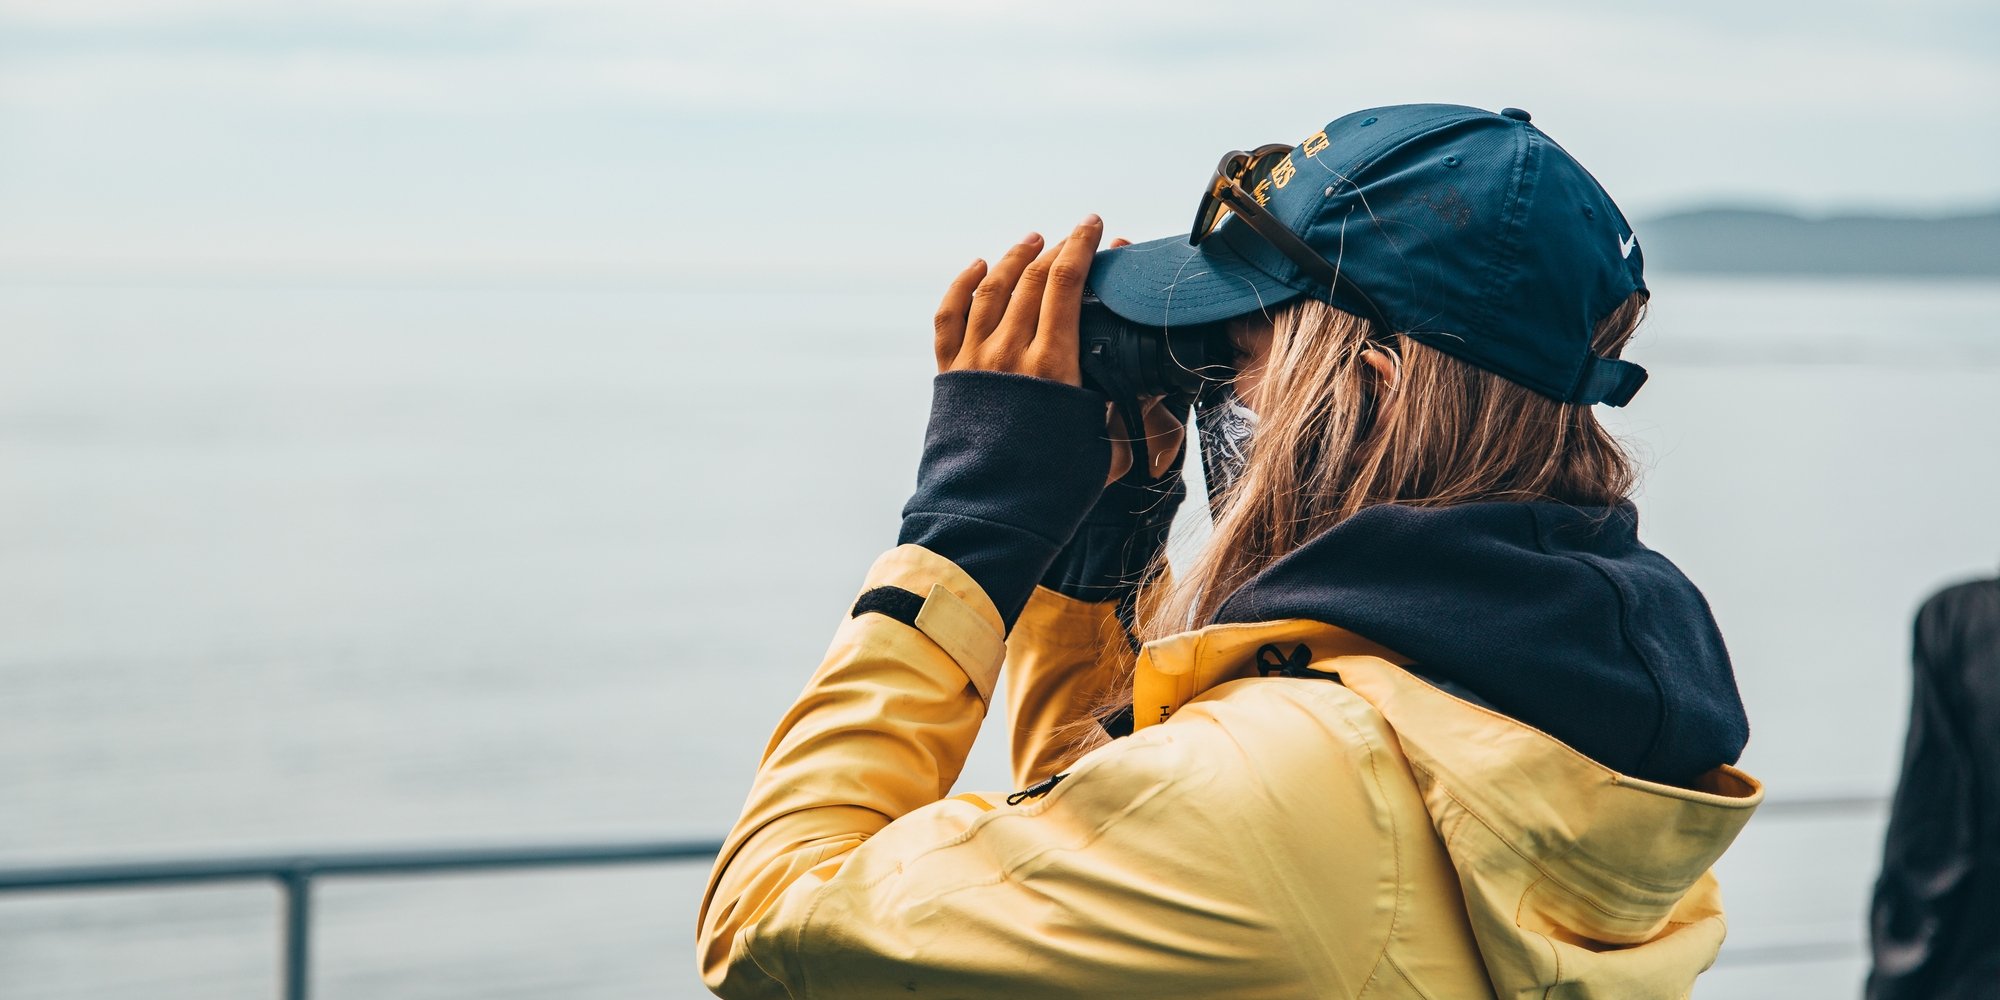 A guide wearing a yellow rain jacket and a blue cap on a Prince of Whales tour scans the water through a pair of binoculars